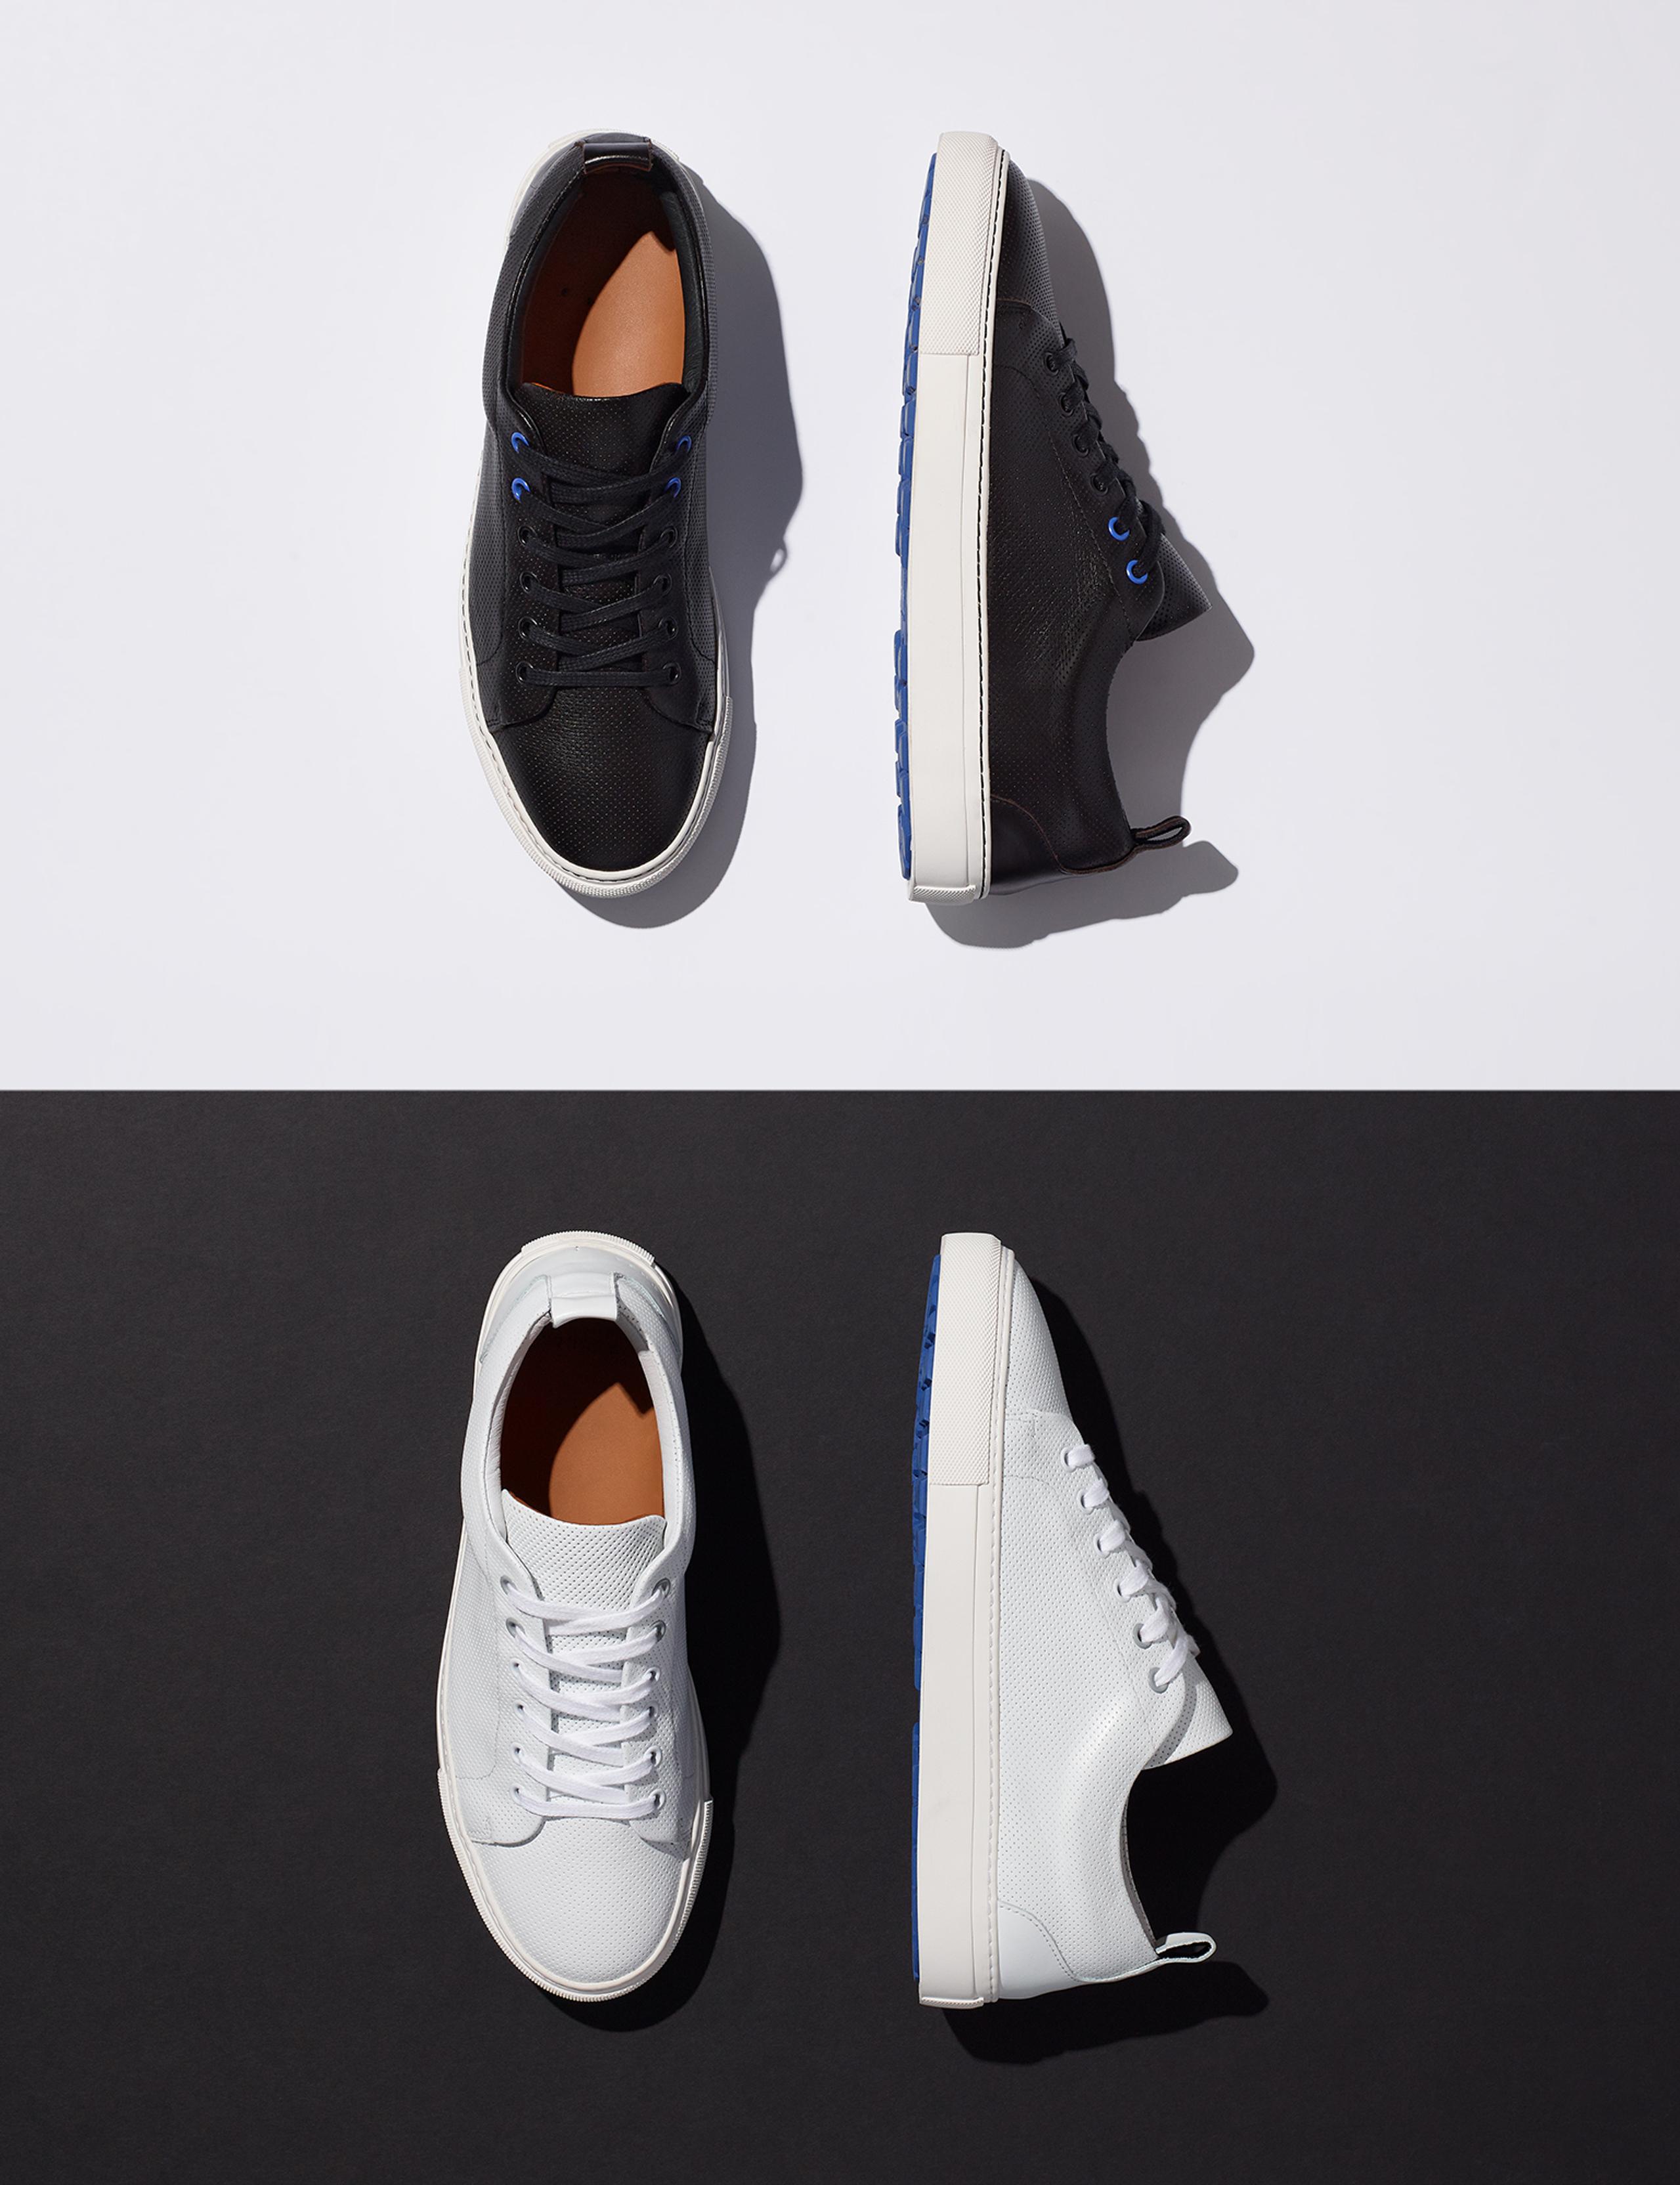 Overview and profile of Onyx Black and White Dalton Low-Top Sneakers